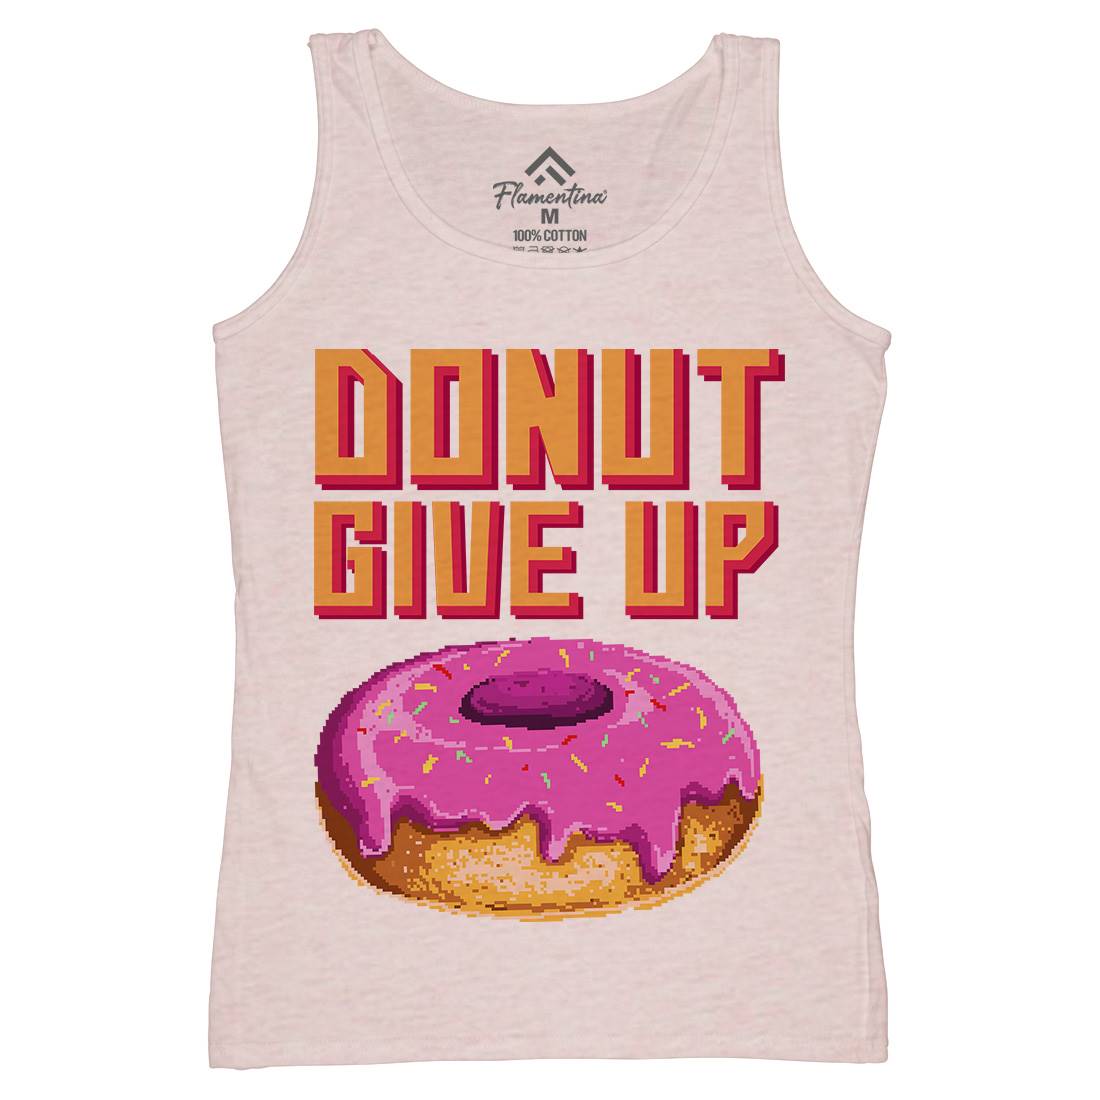 Donut Give Up Womens Organic Tank Top Vest Food B895